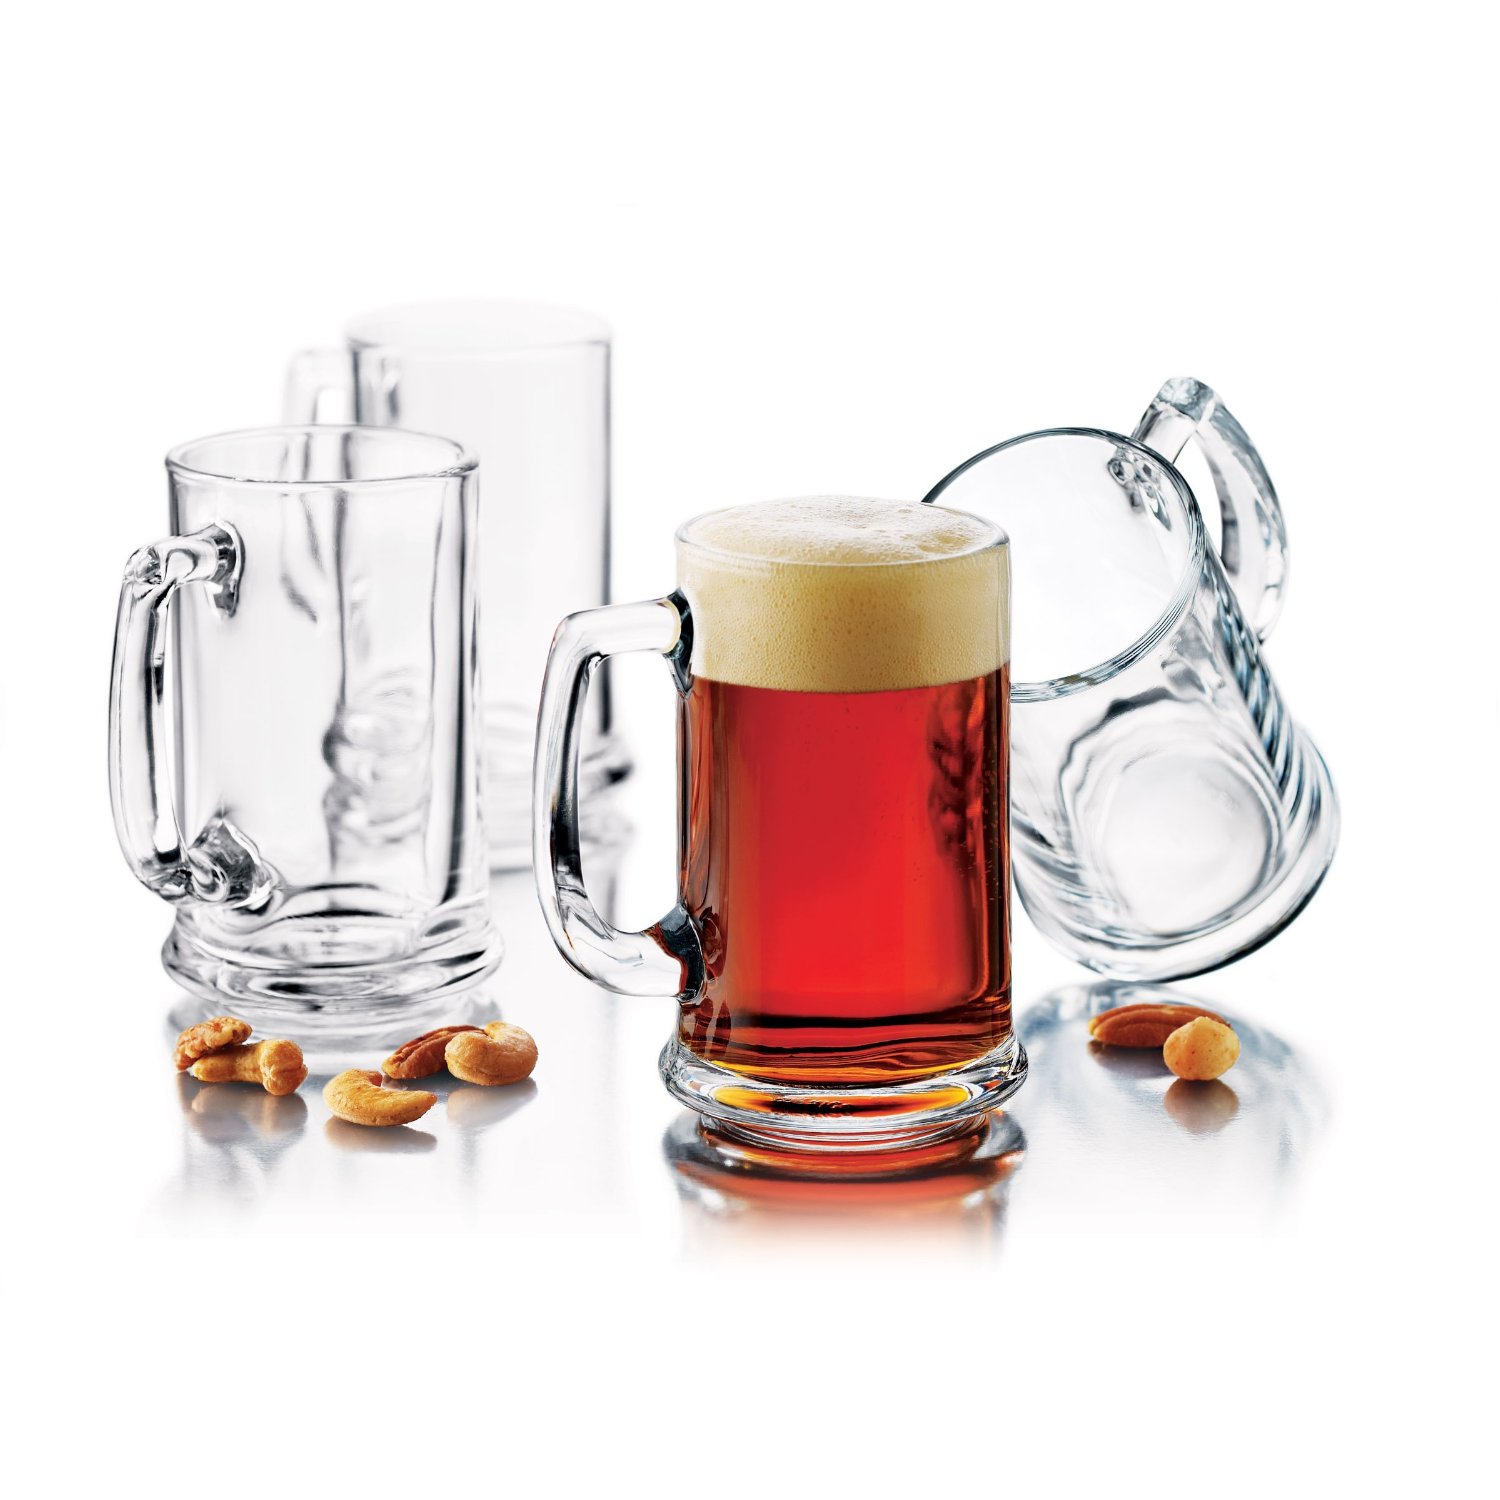 Libbey Brewmaster 15-Ounce Beer Mug 6-Piece Set, Clear $13.49